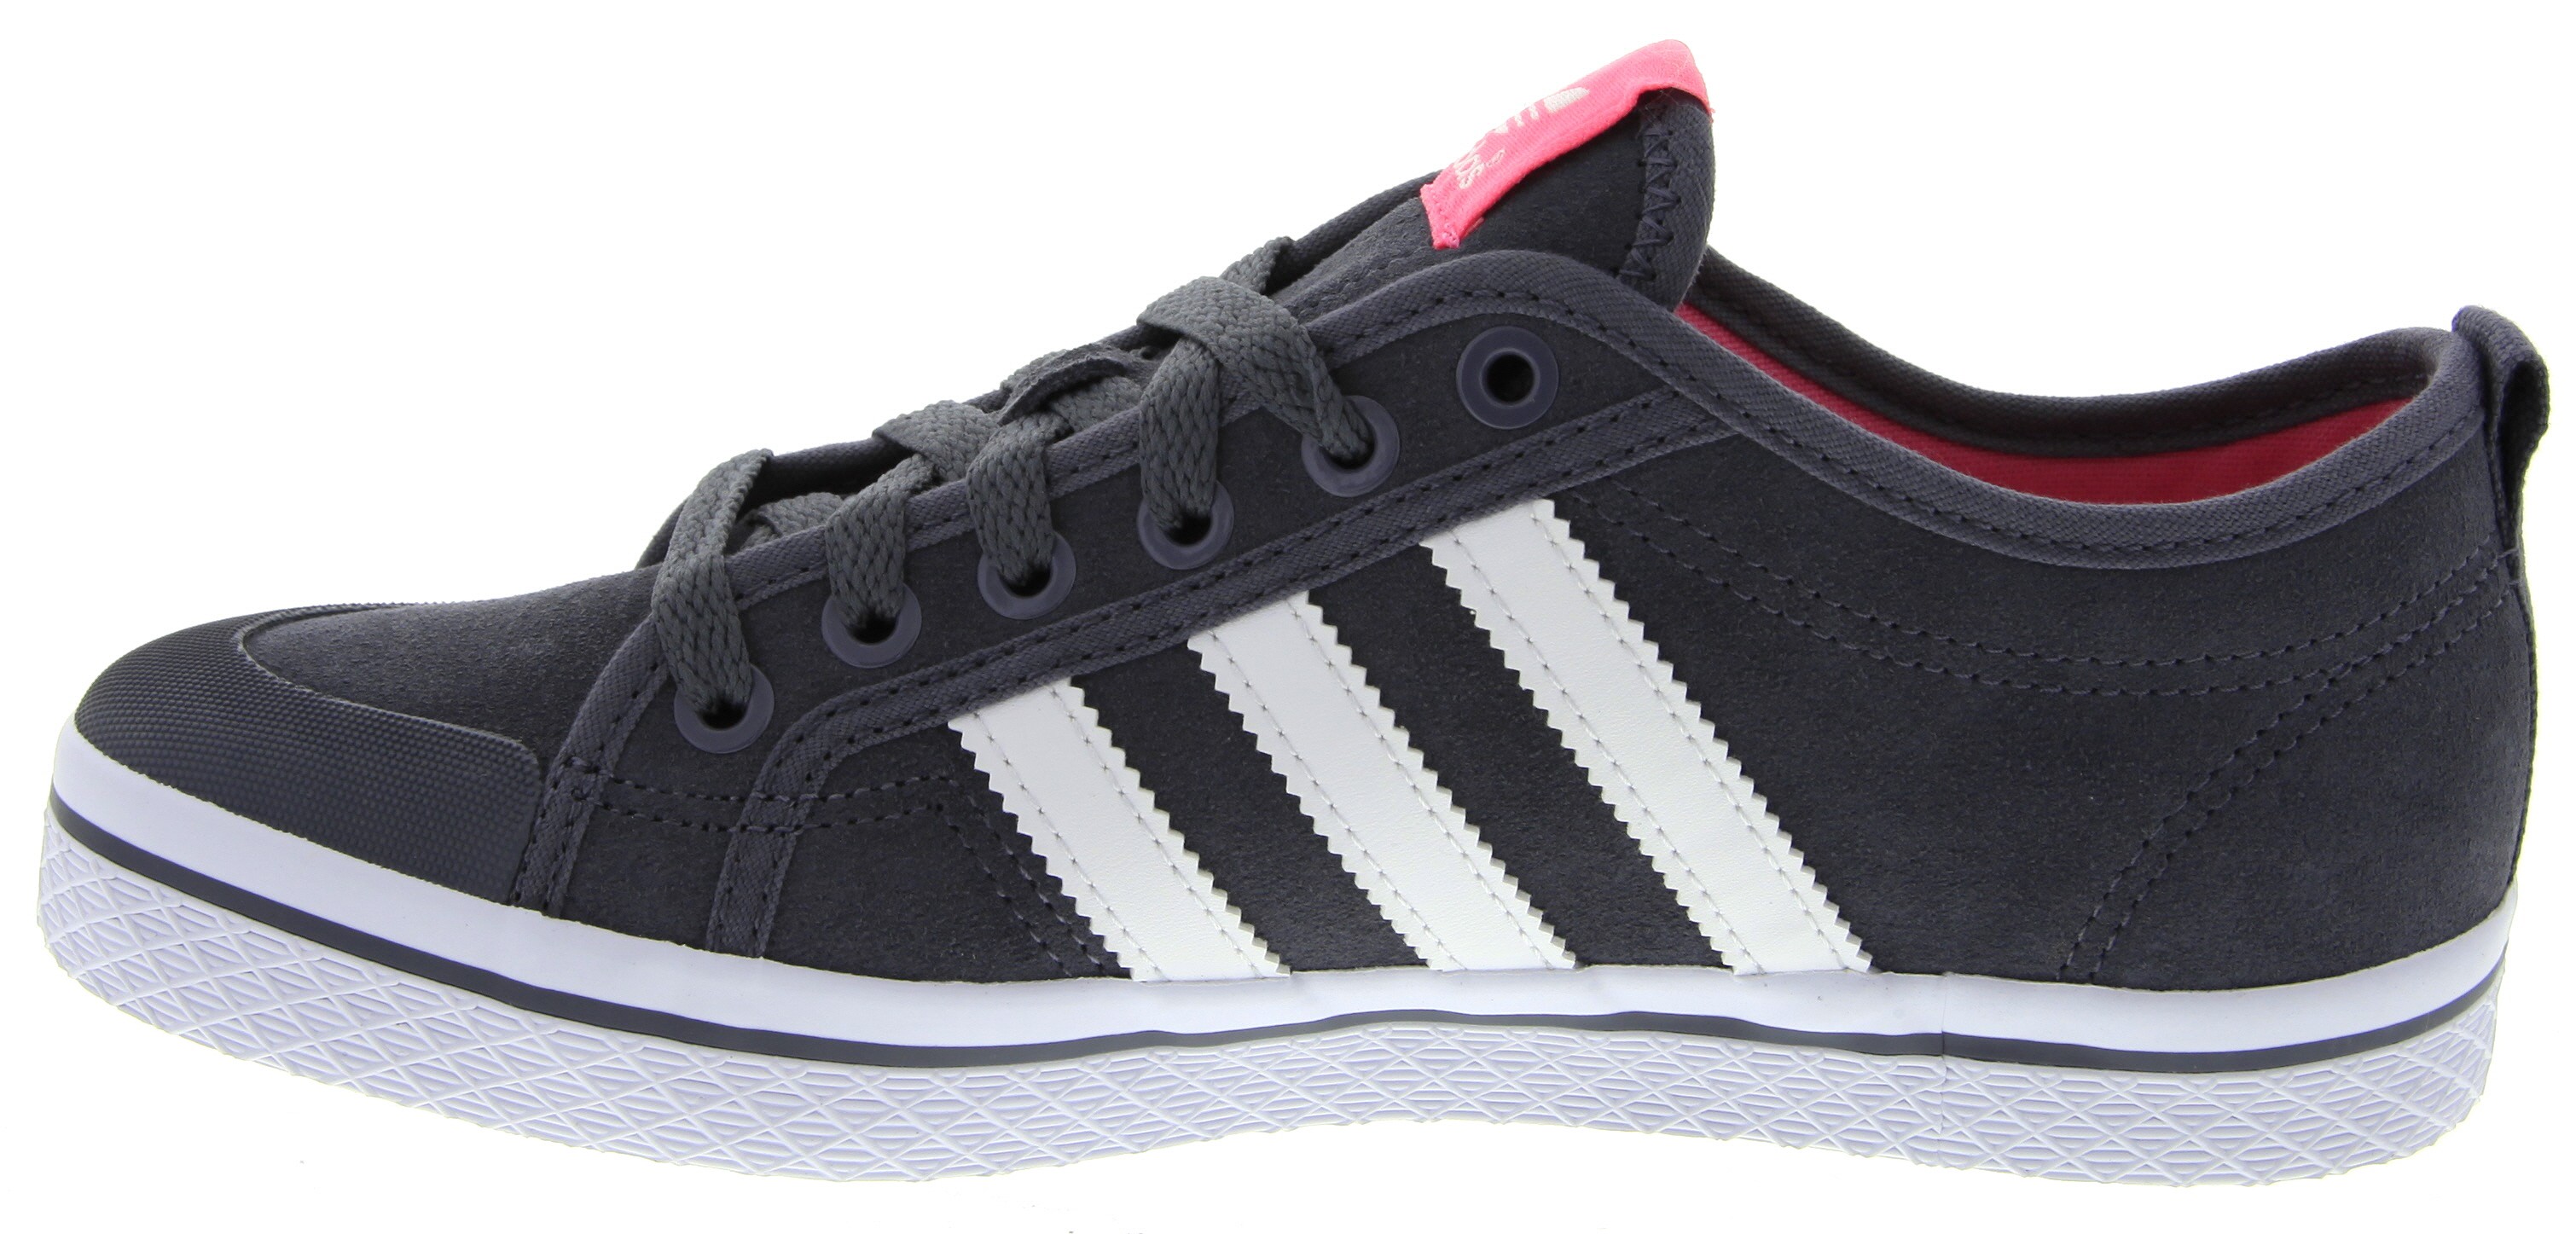 adidas honey ... honey stripes low casual shoes in grey ... ICLULKC